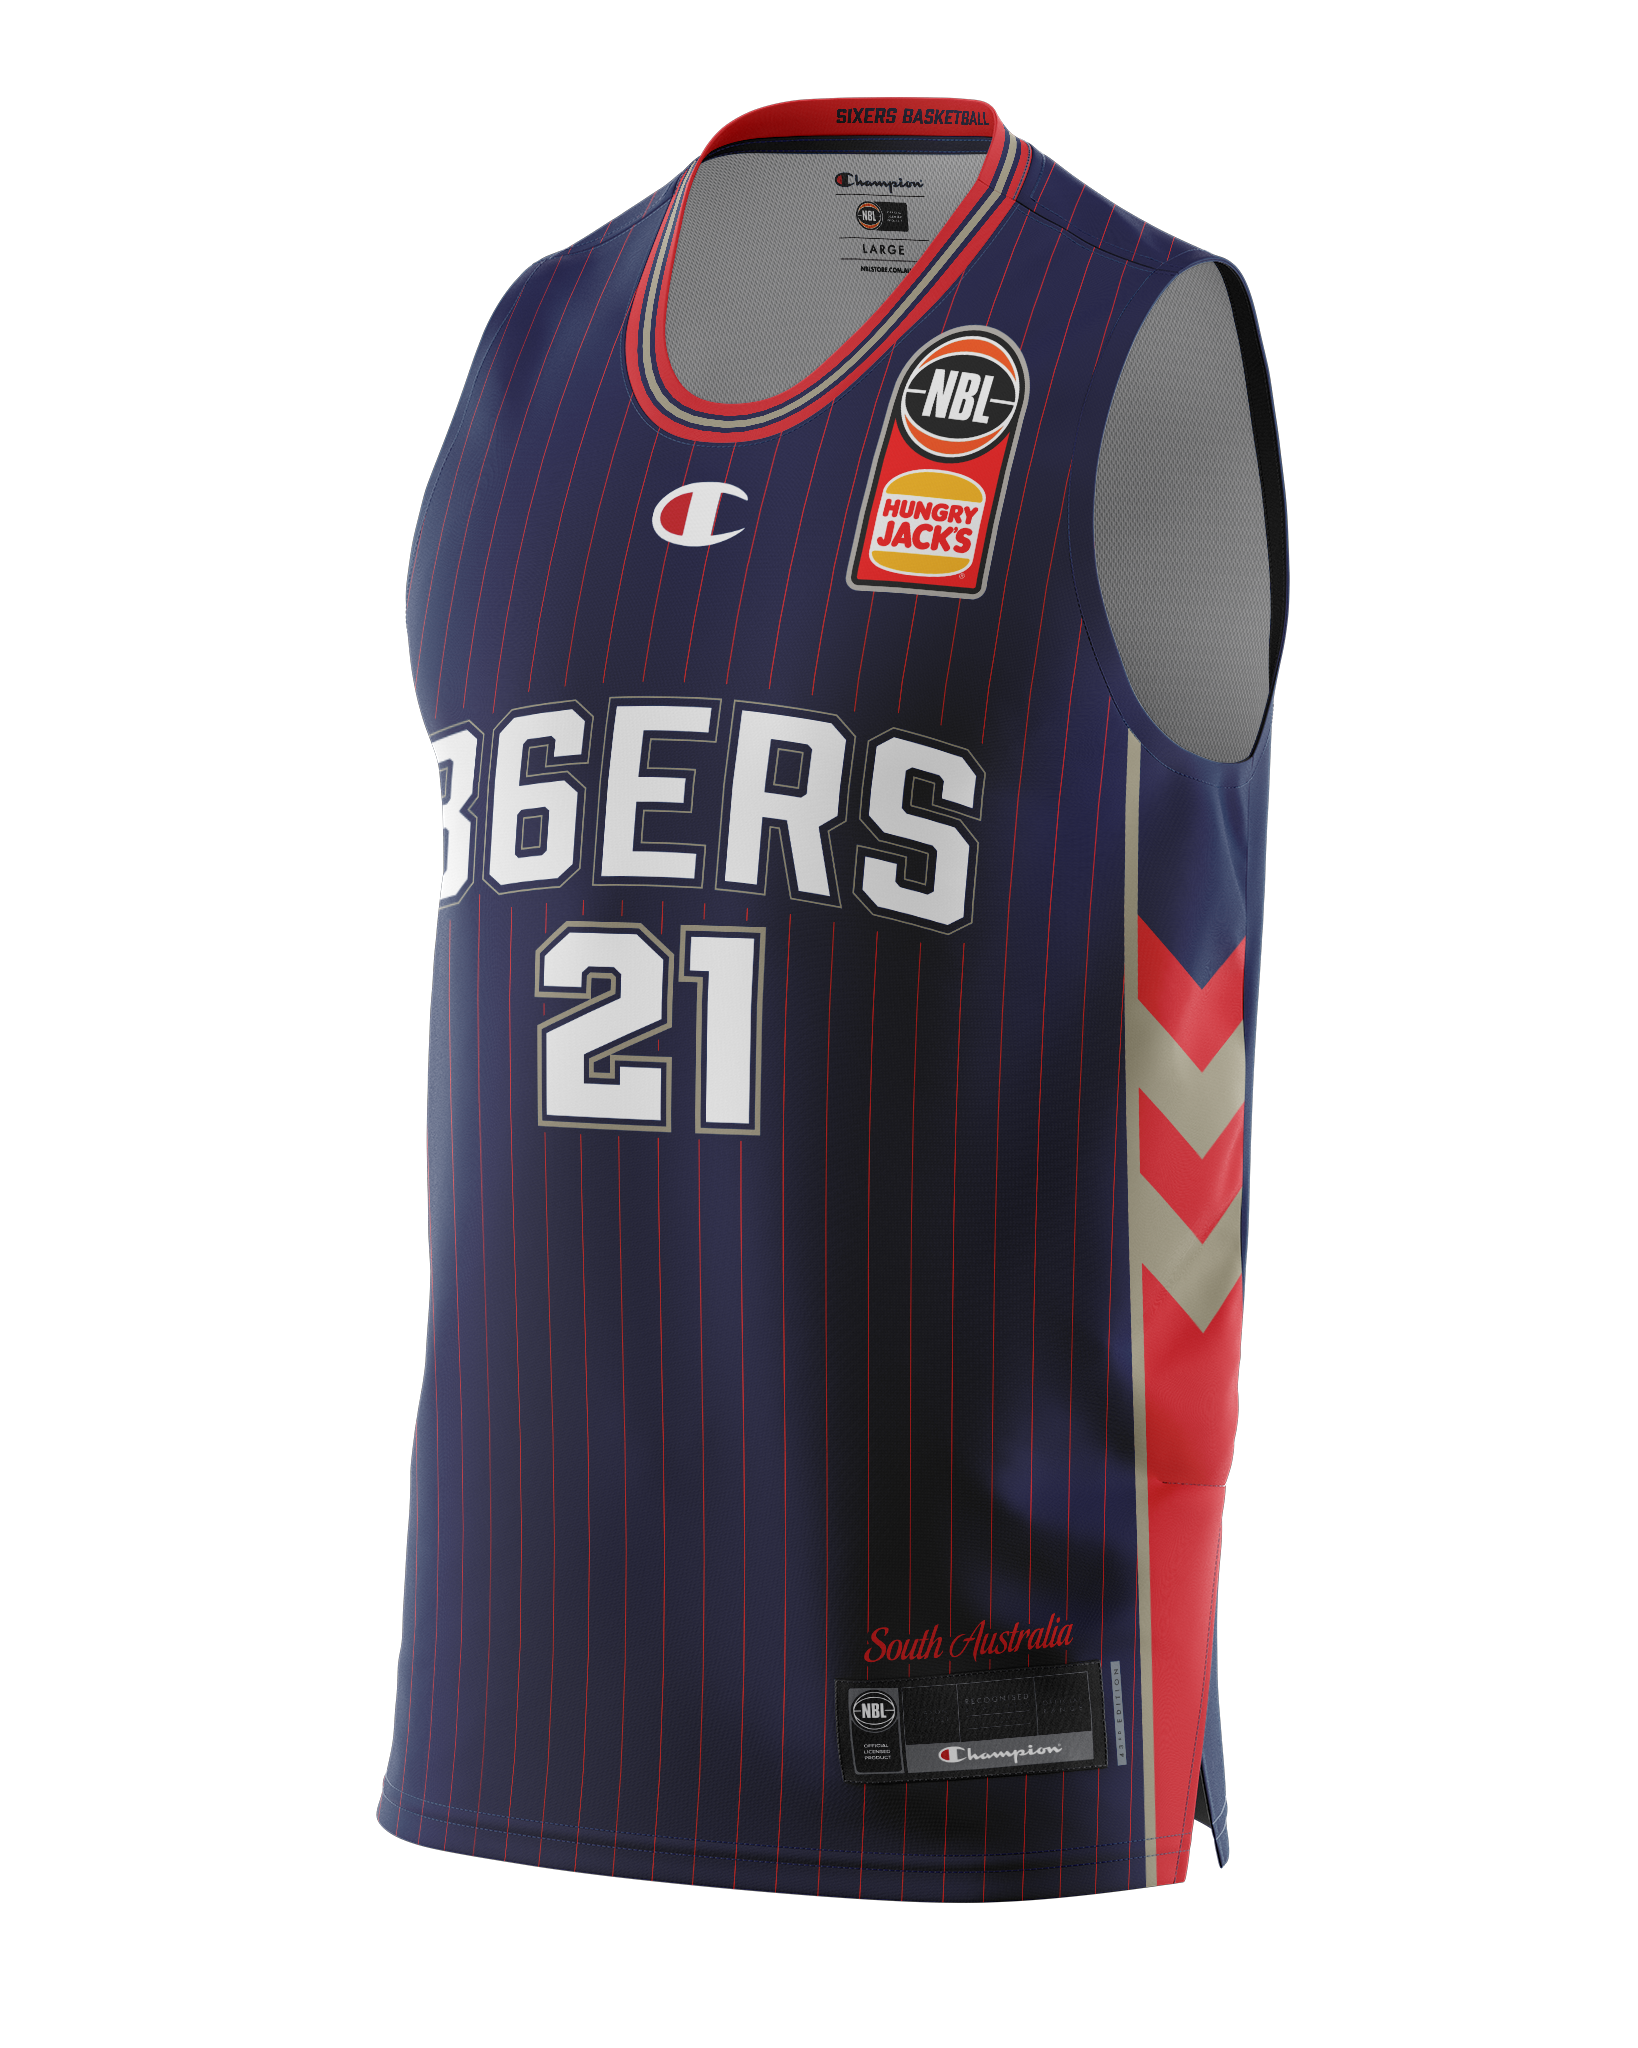 Adelaide 36ers 2021 Authentic Home Youth Jersey - Daniel Johnson - Adelaide 36ers